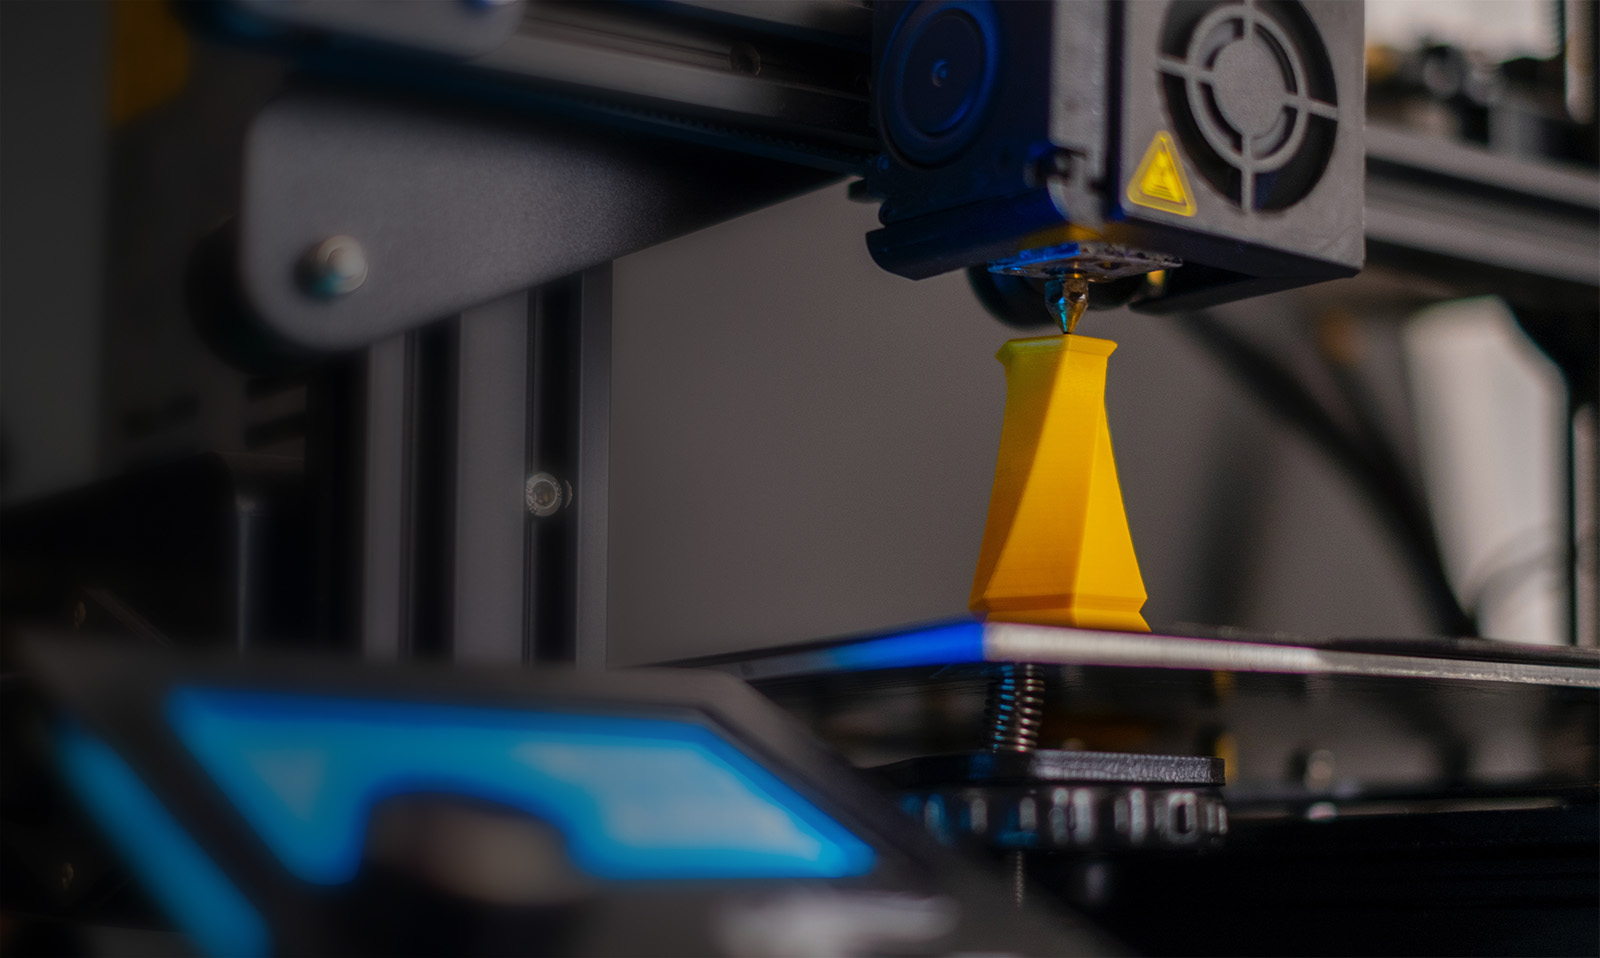 Your One Stop 3D Printing Solution Provider - MAKE3D